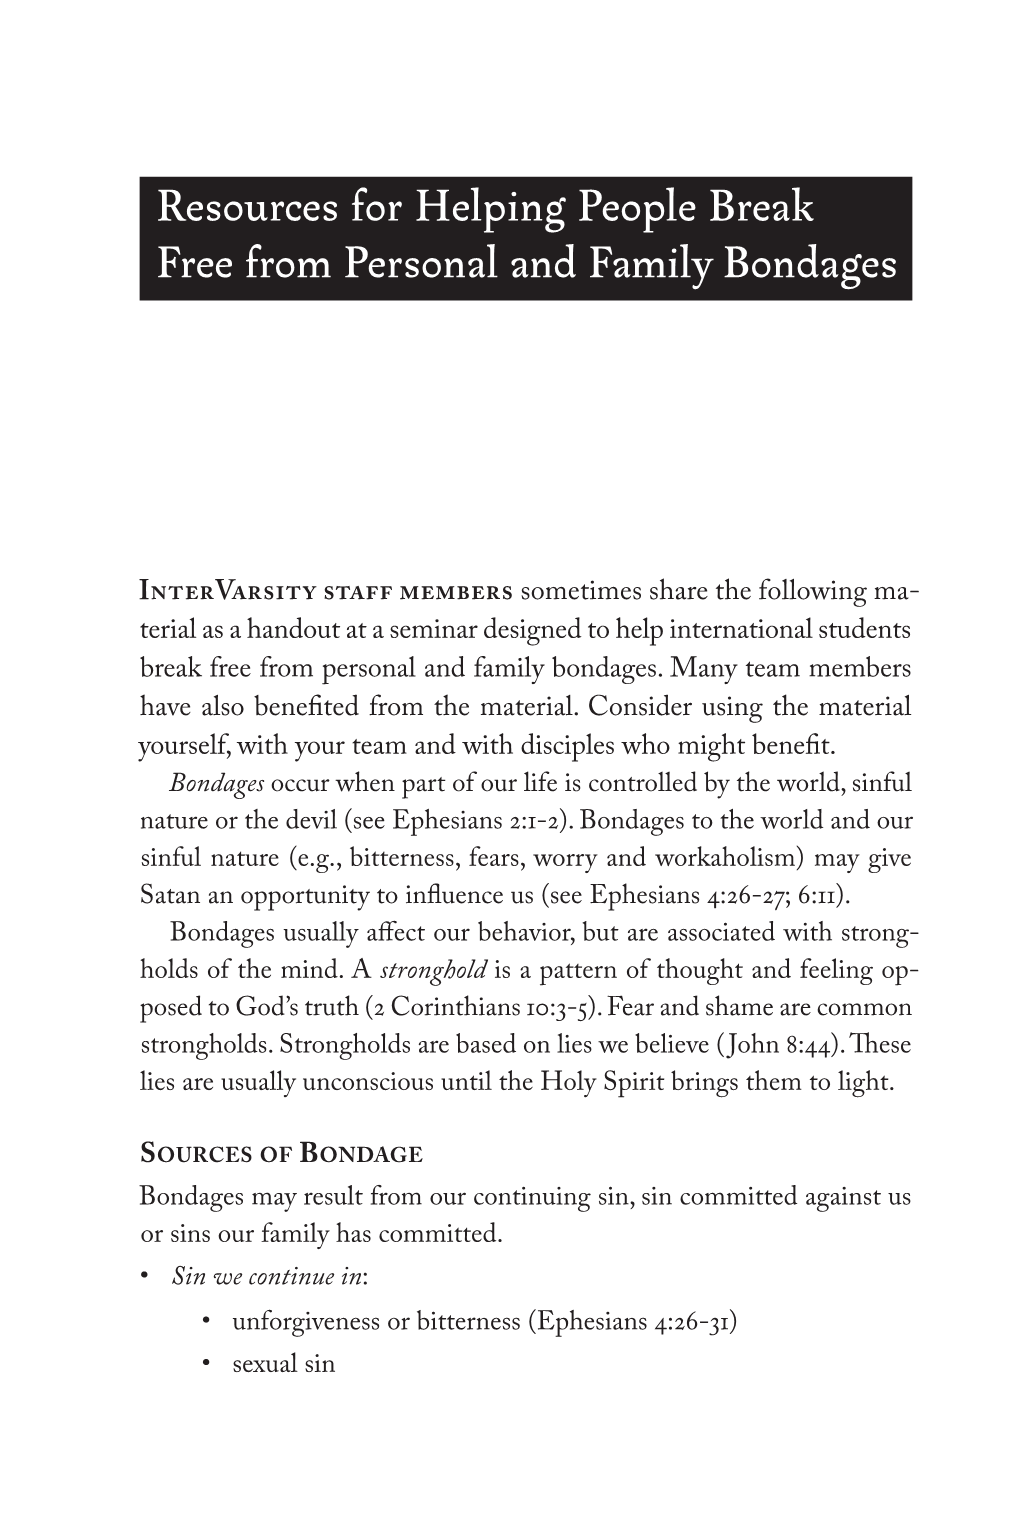 Resources for Helping People Break Free from Personal and Family Bondages